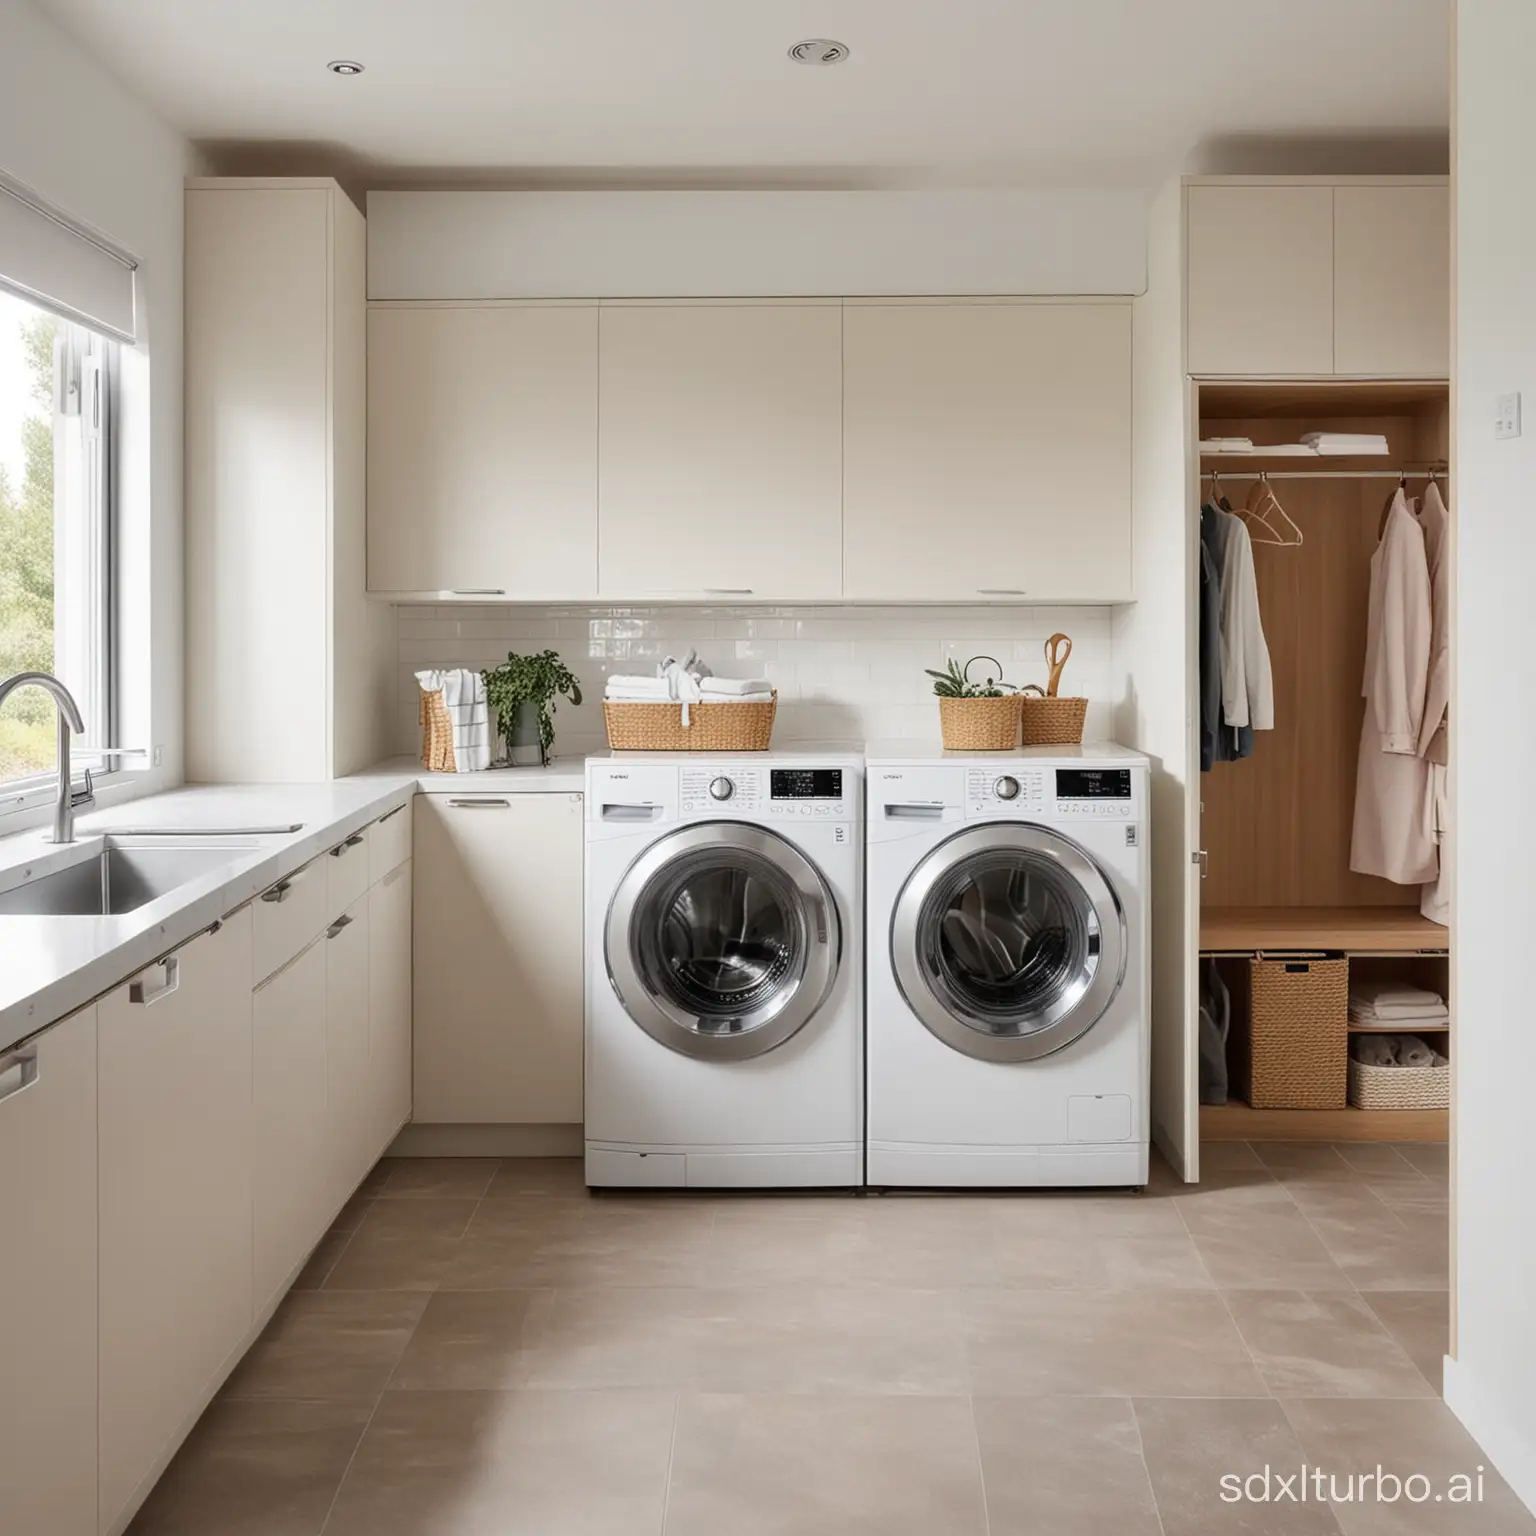 Modern-Laundry-Room-with-Two-Visible-Washing-Machines